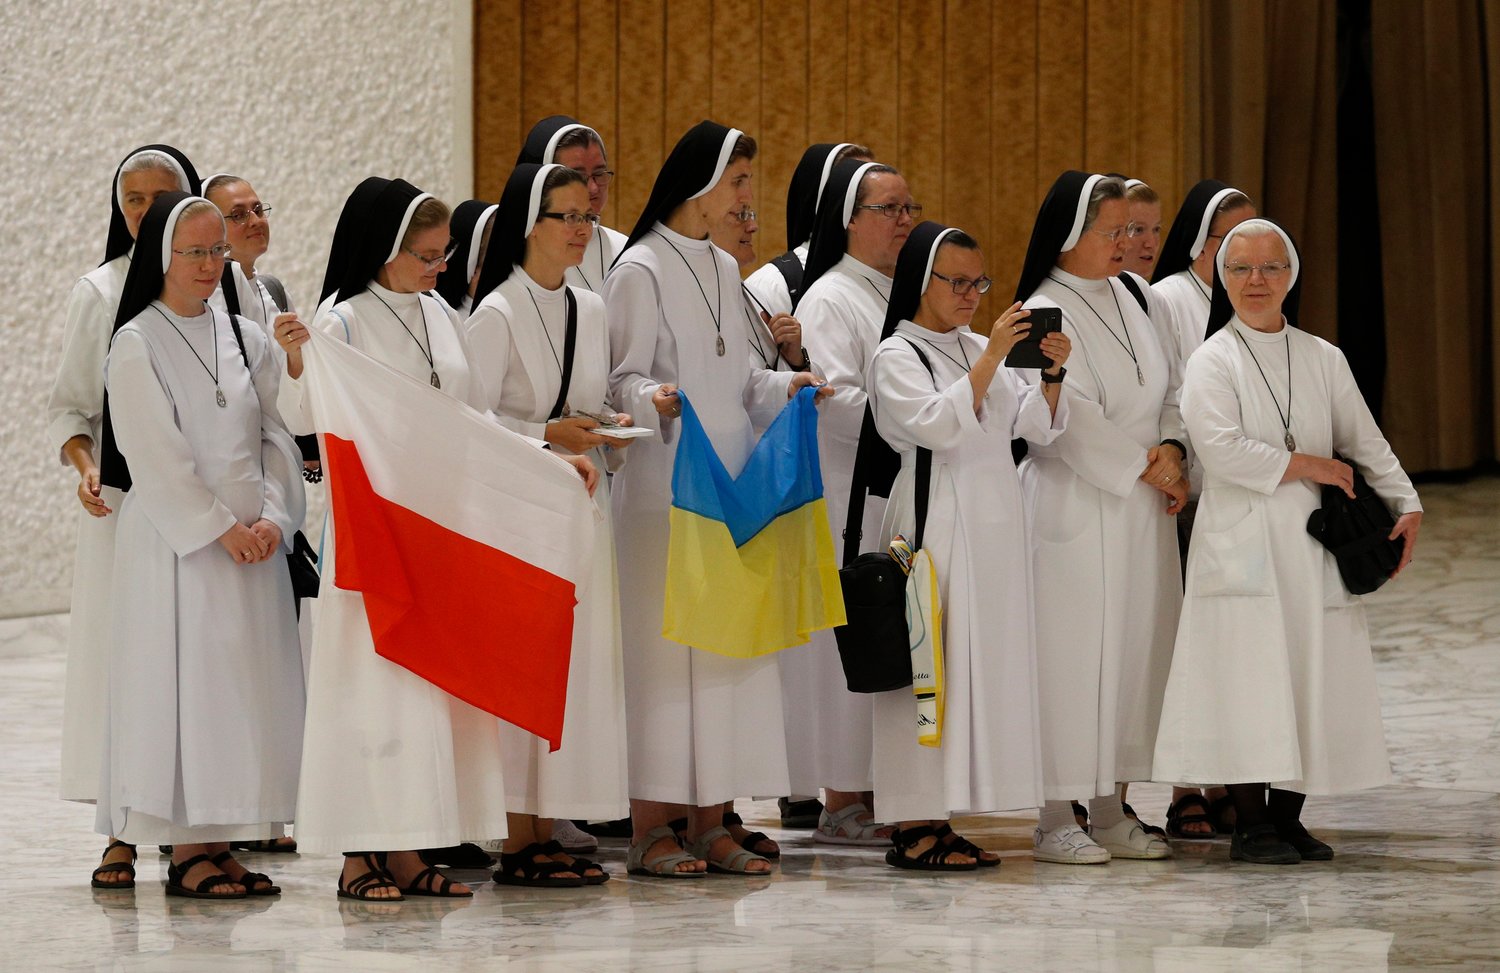 Nuns hold the national flags of Poland and Ukraine as they prepare to greet Pope Francis during his general audience in the Paul VI hall at the Vatican Aug. 3.